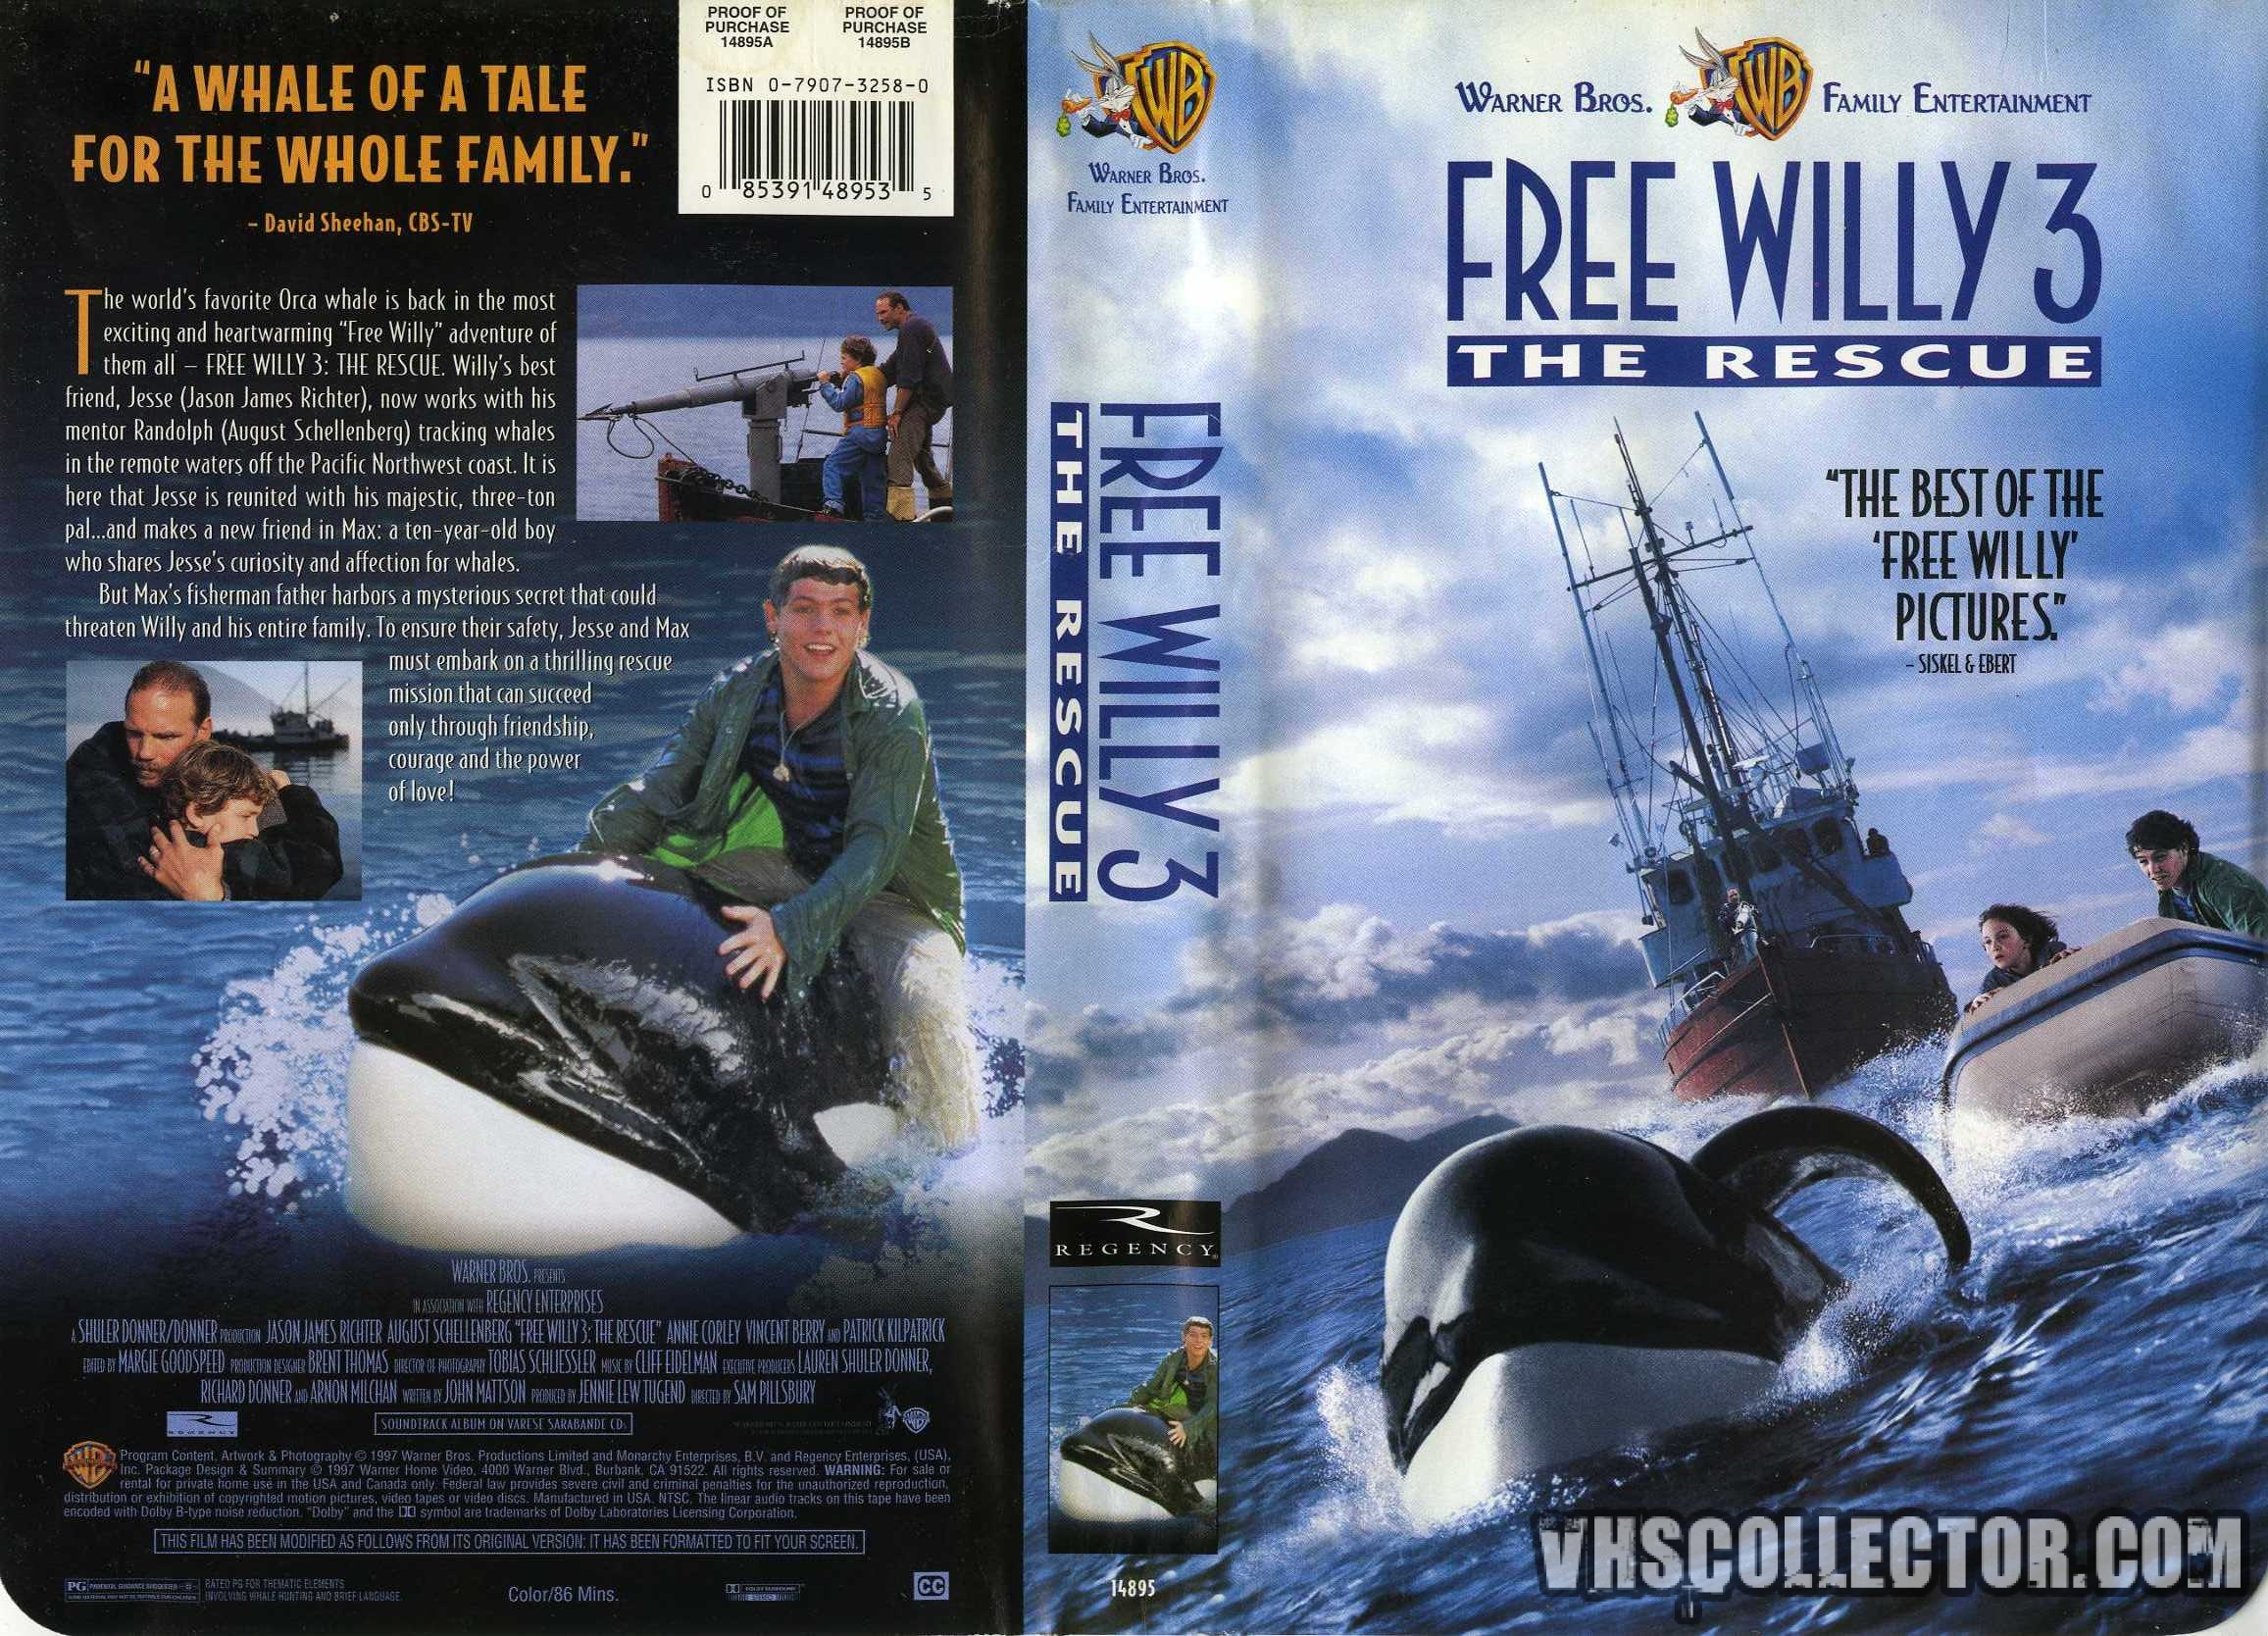 Free Willy 3: The Rescue #5